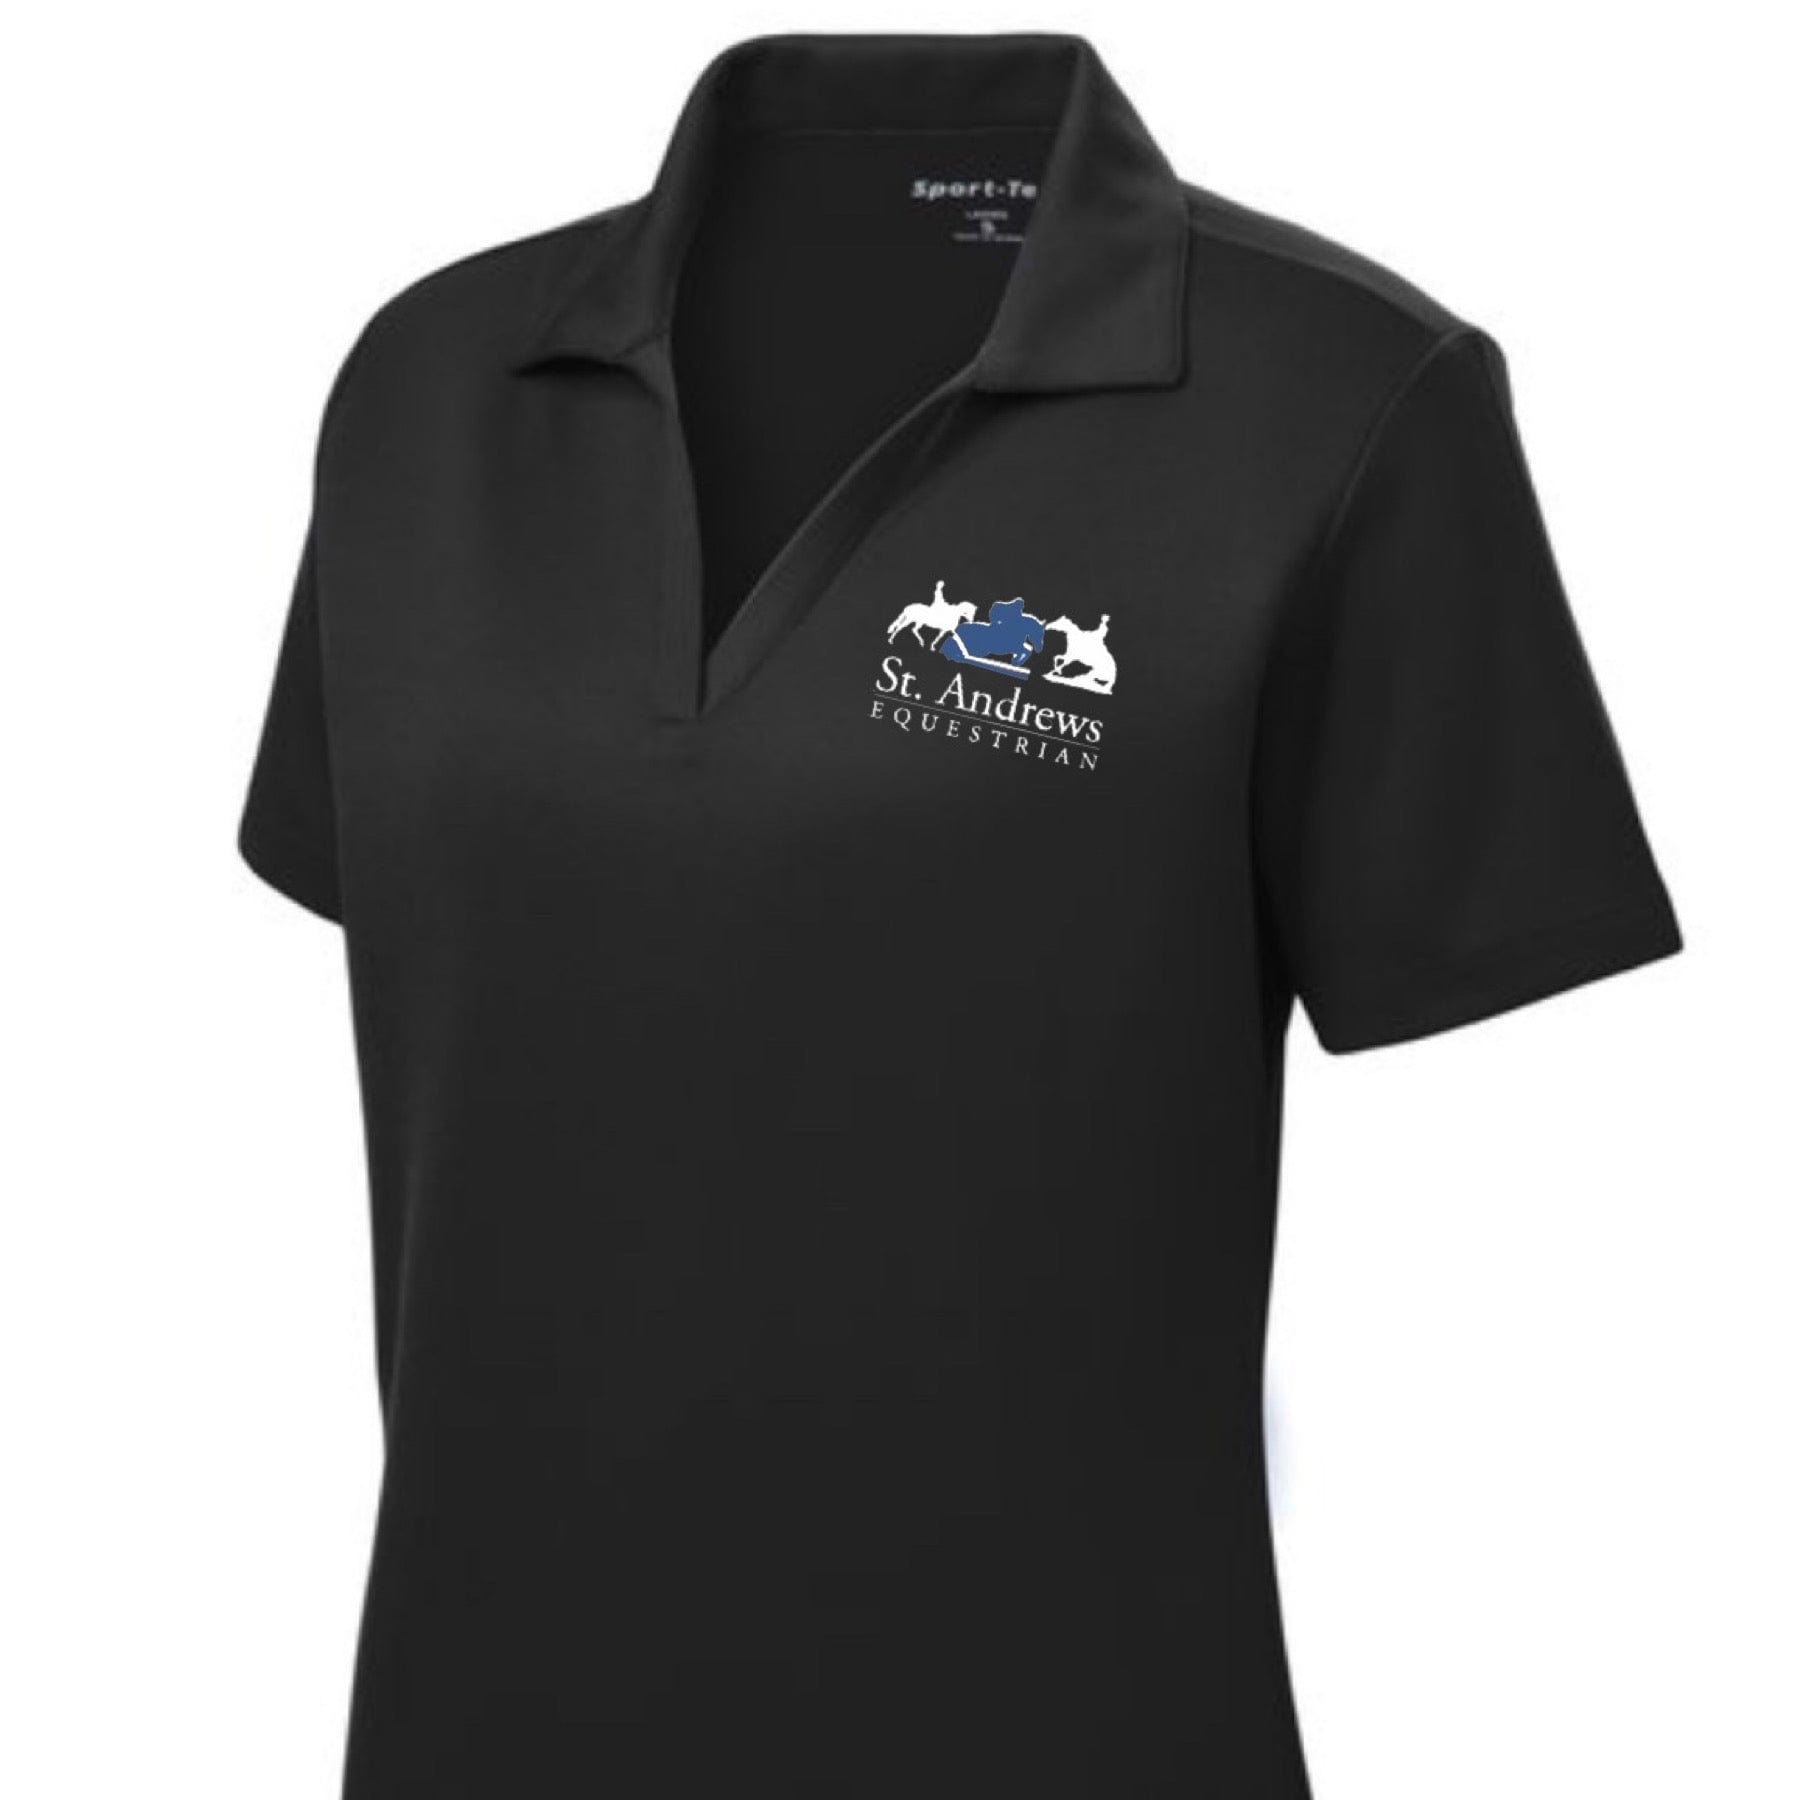 Equestrian Team Apparel St. Andrews Equestrian Polo Shirt equestrian team apparel online tack store mobile tack store custom farm apparel custom show stable clothing equestrian lifestyle horse show clothing riding clothes horses equestrian tack store